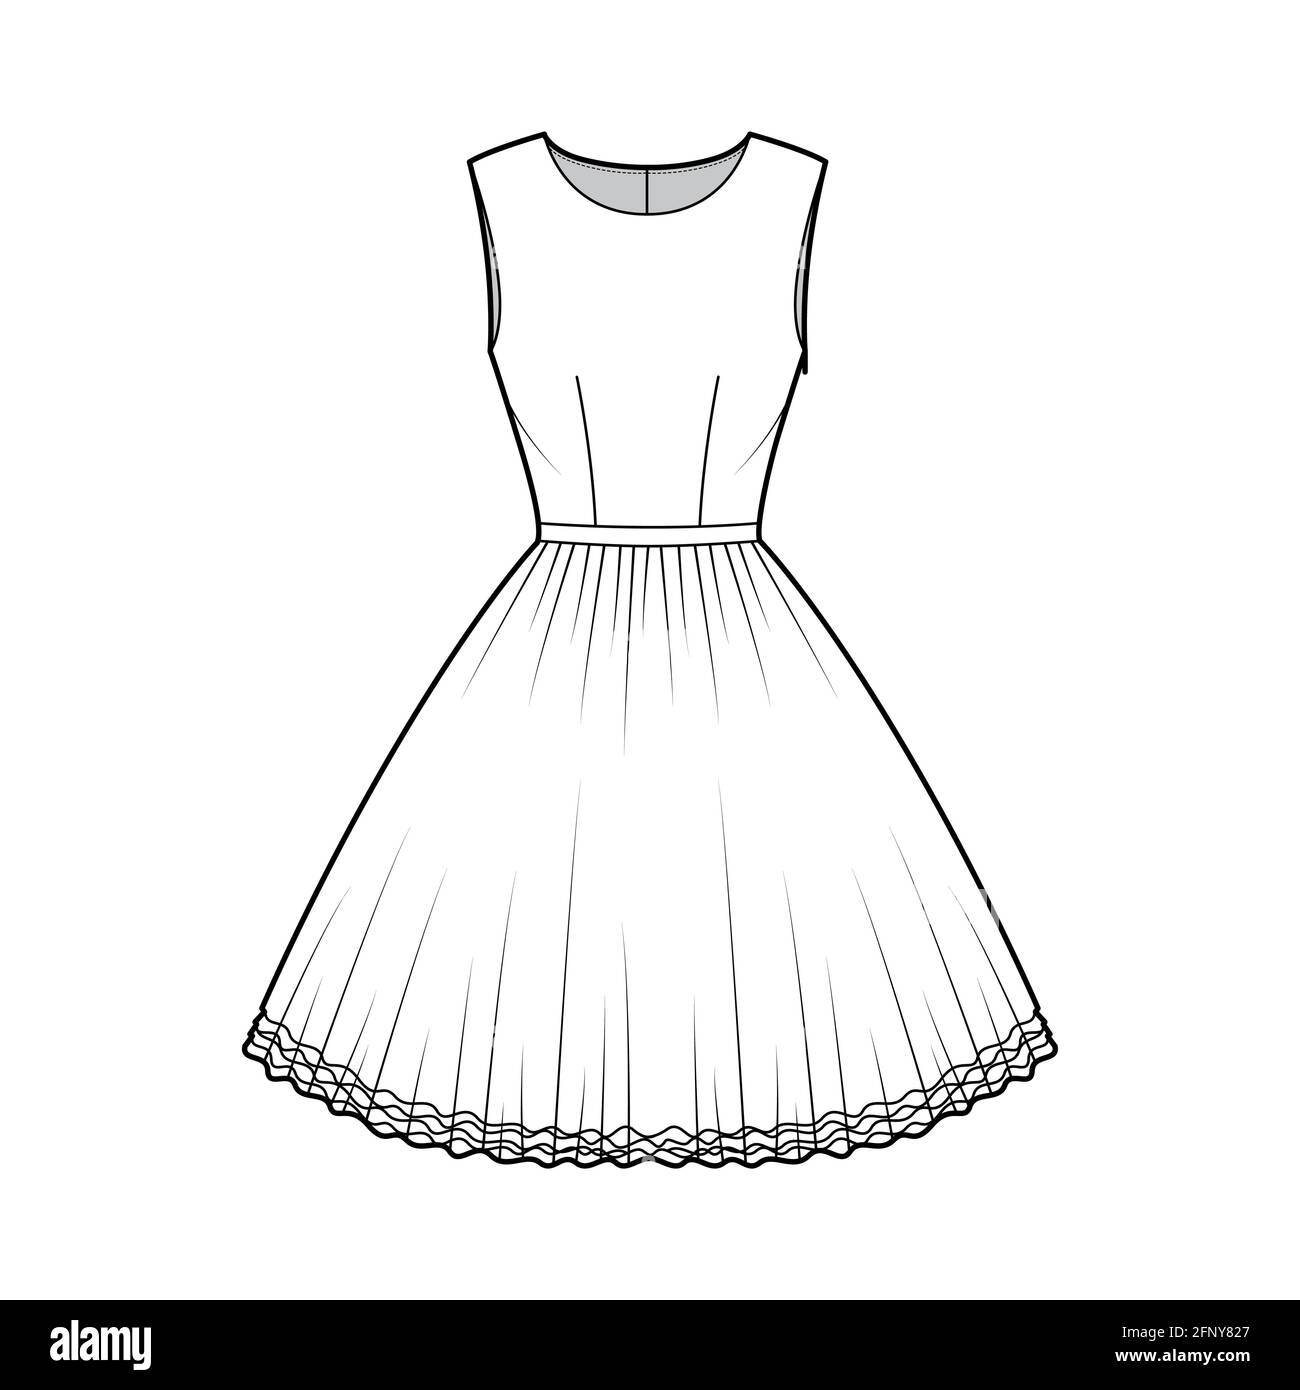 Dress tutu technical fashion illustration with sleeveless, fitted body ...